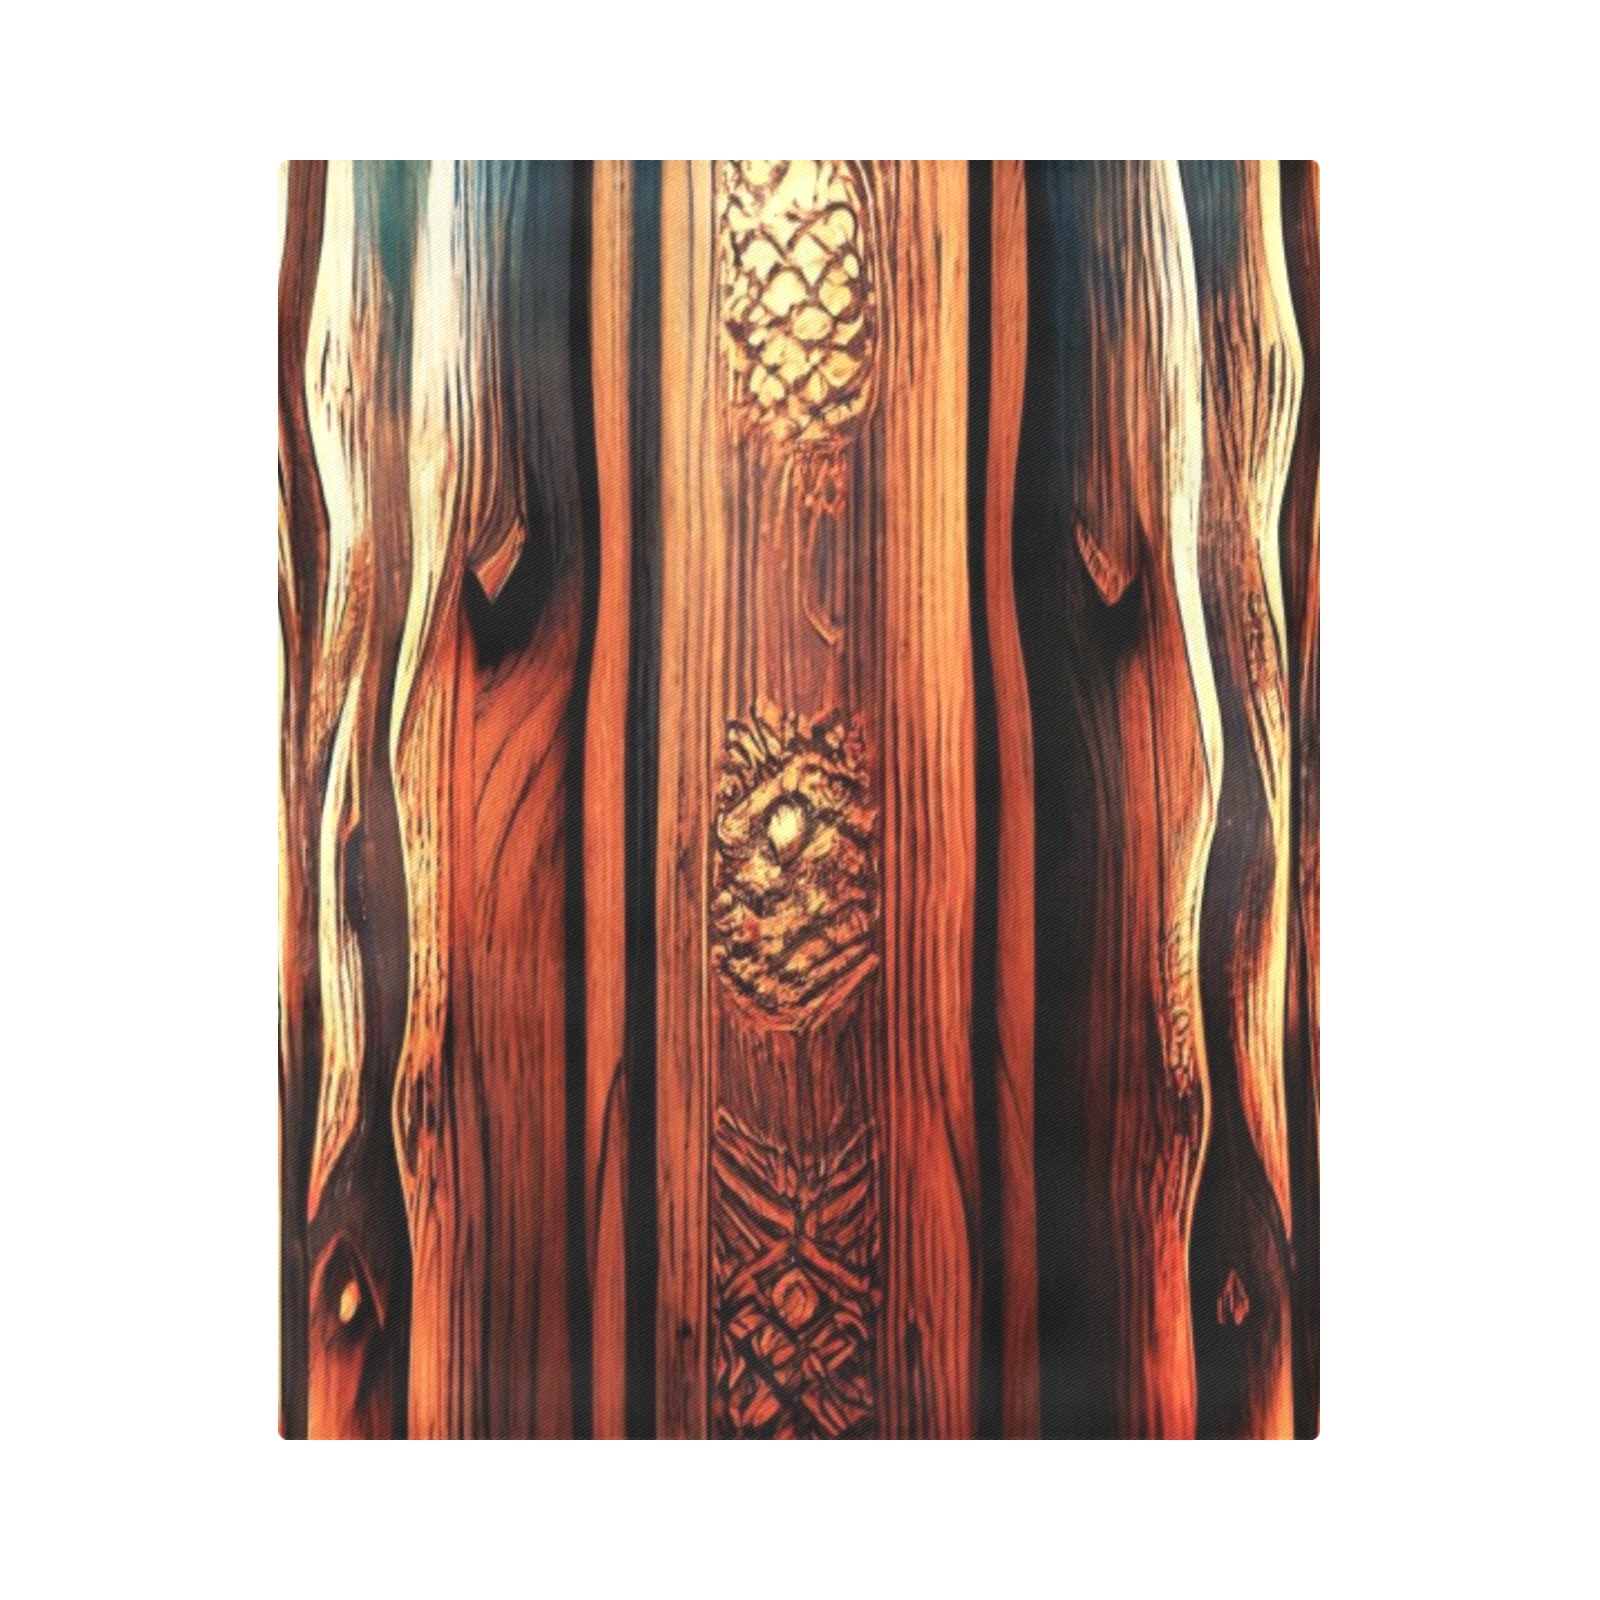 Aztec pattern on wood Duvet Cover 86"x70" ( All-over-print)